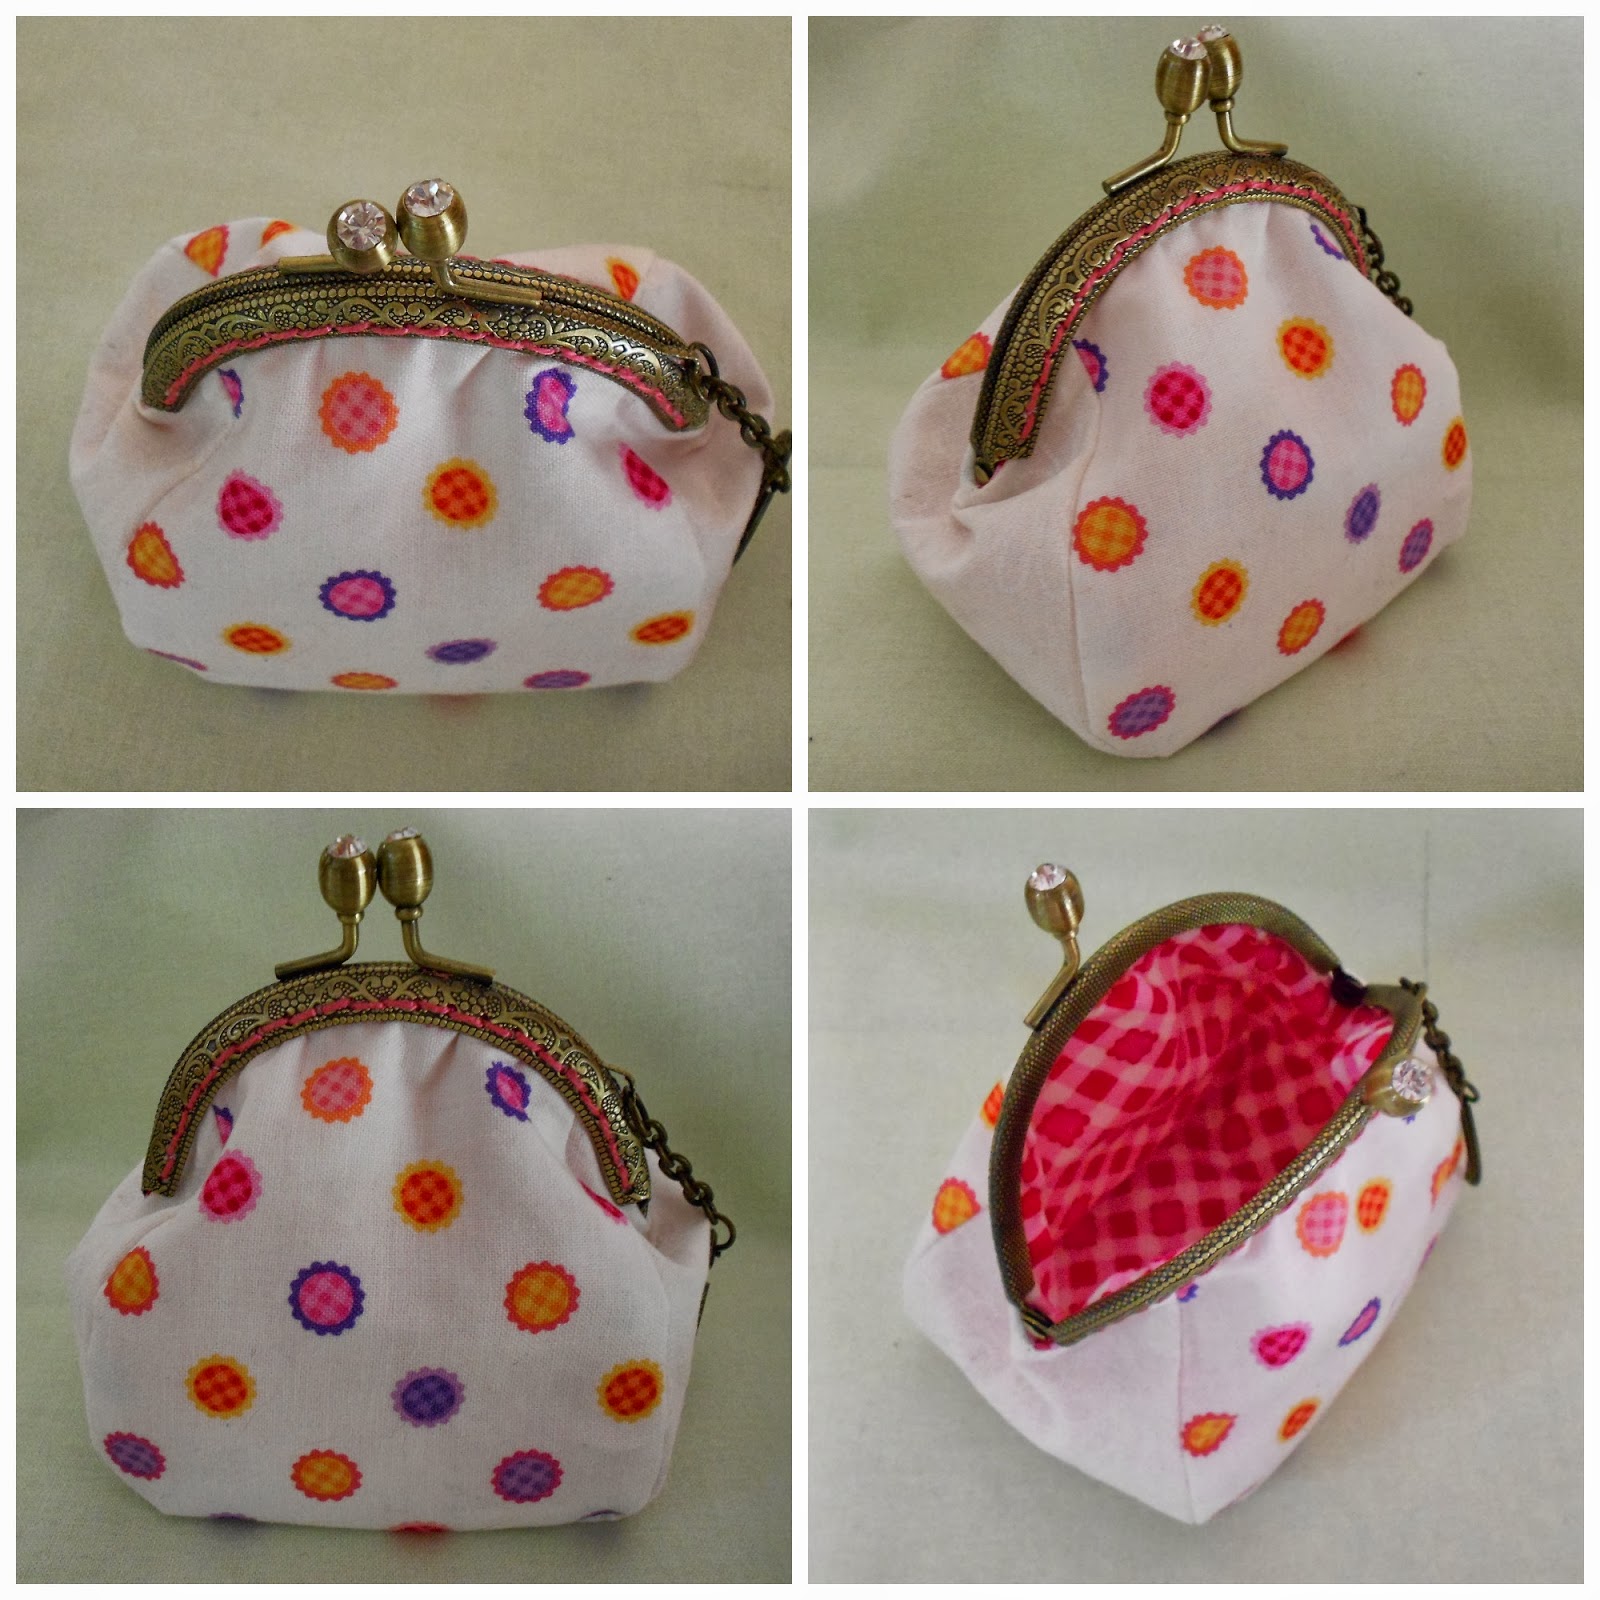 How to Make a Coin Purse with a Metal Frame | Polka Dot Chair